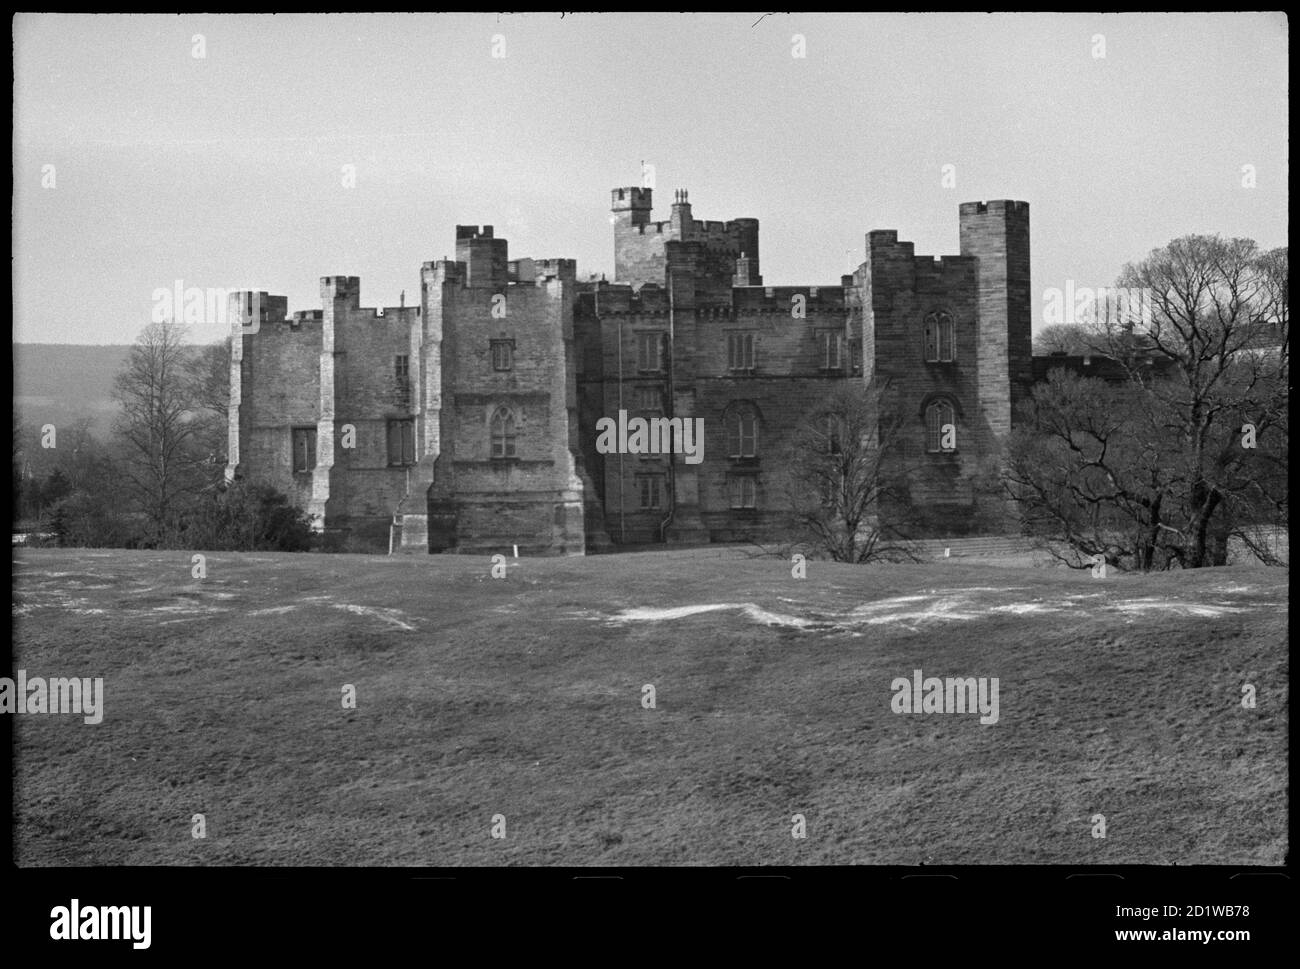 Brancepeth Castle, Brancepeth Park, Brancepeth, County Durham. An exterior view of Brancepeth Castle, showing the south range. Stock Photo